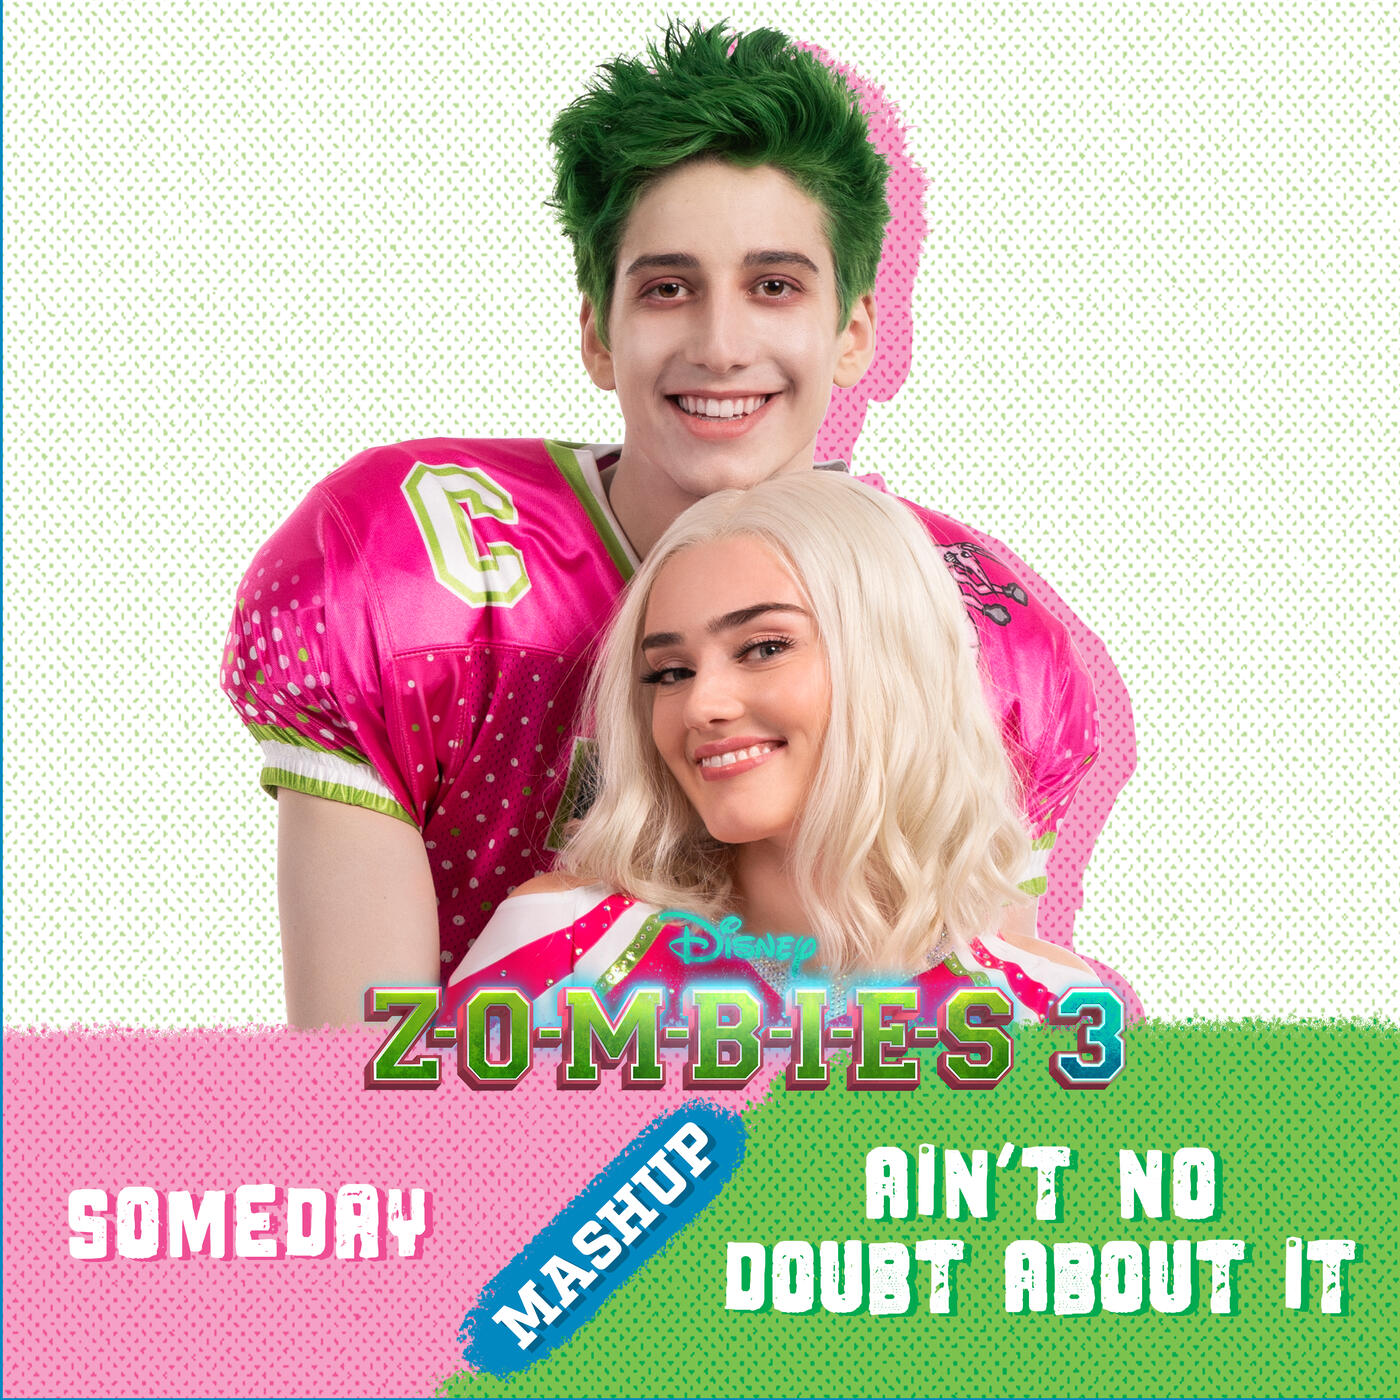 11 Zombies 2 Facts from Milo Manheim, Meg Donnelly & Ariel Martin